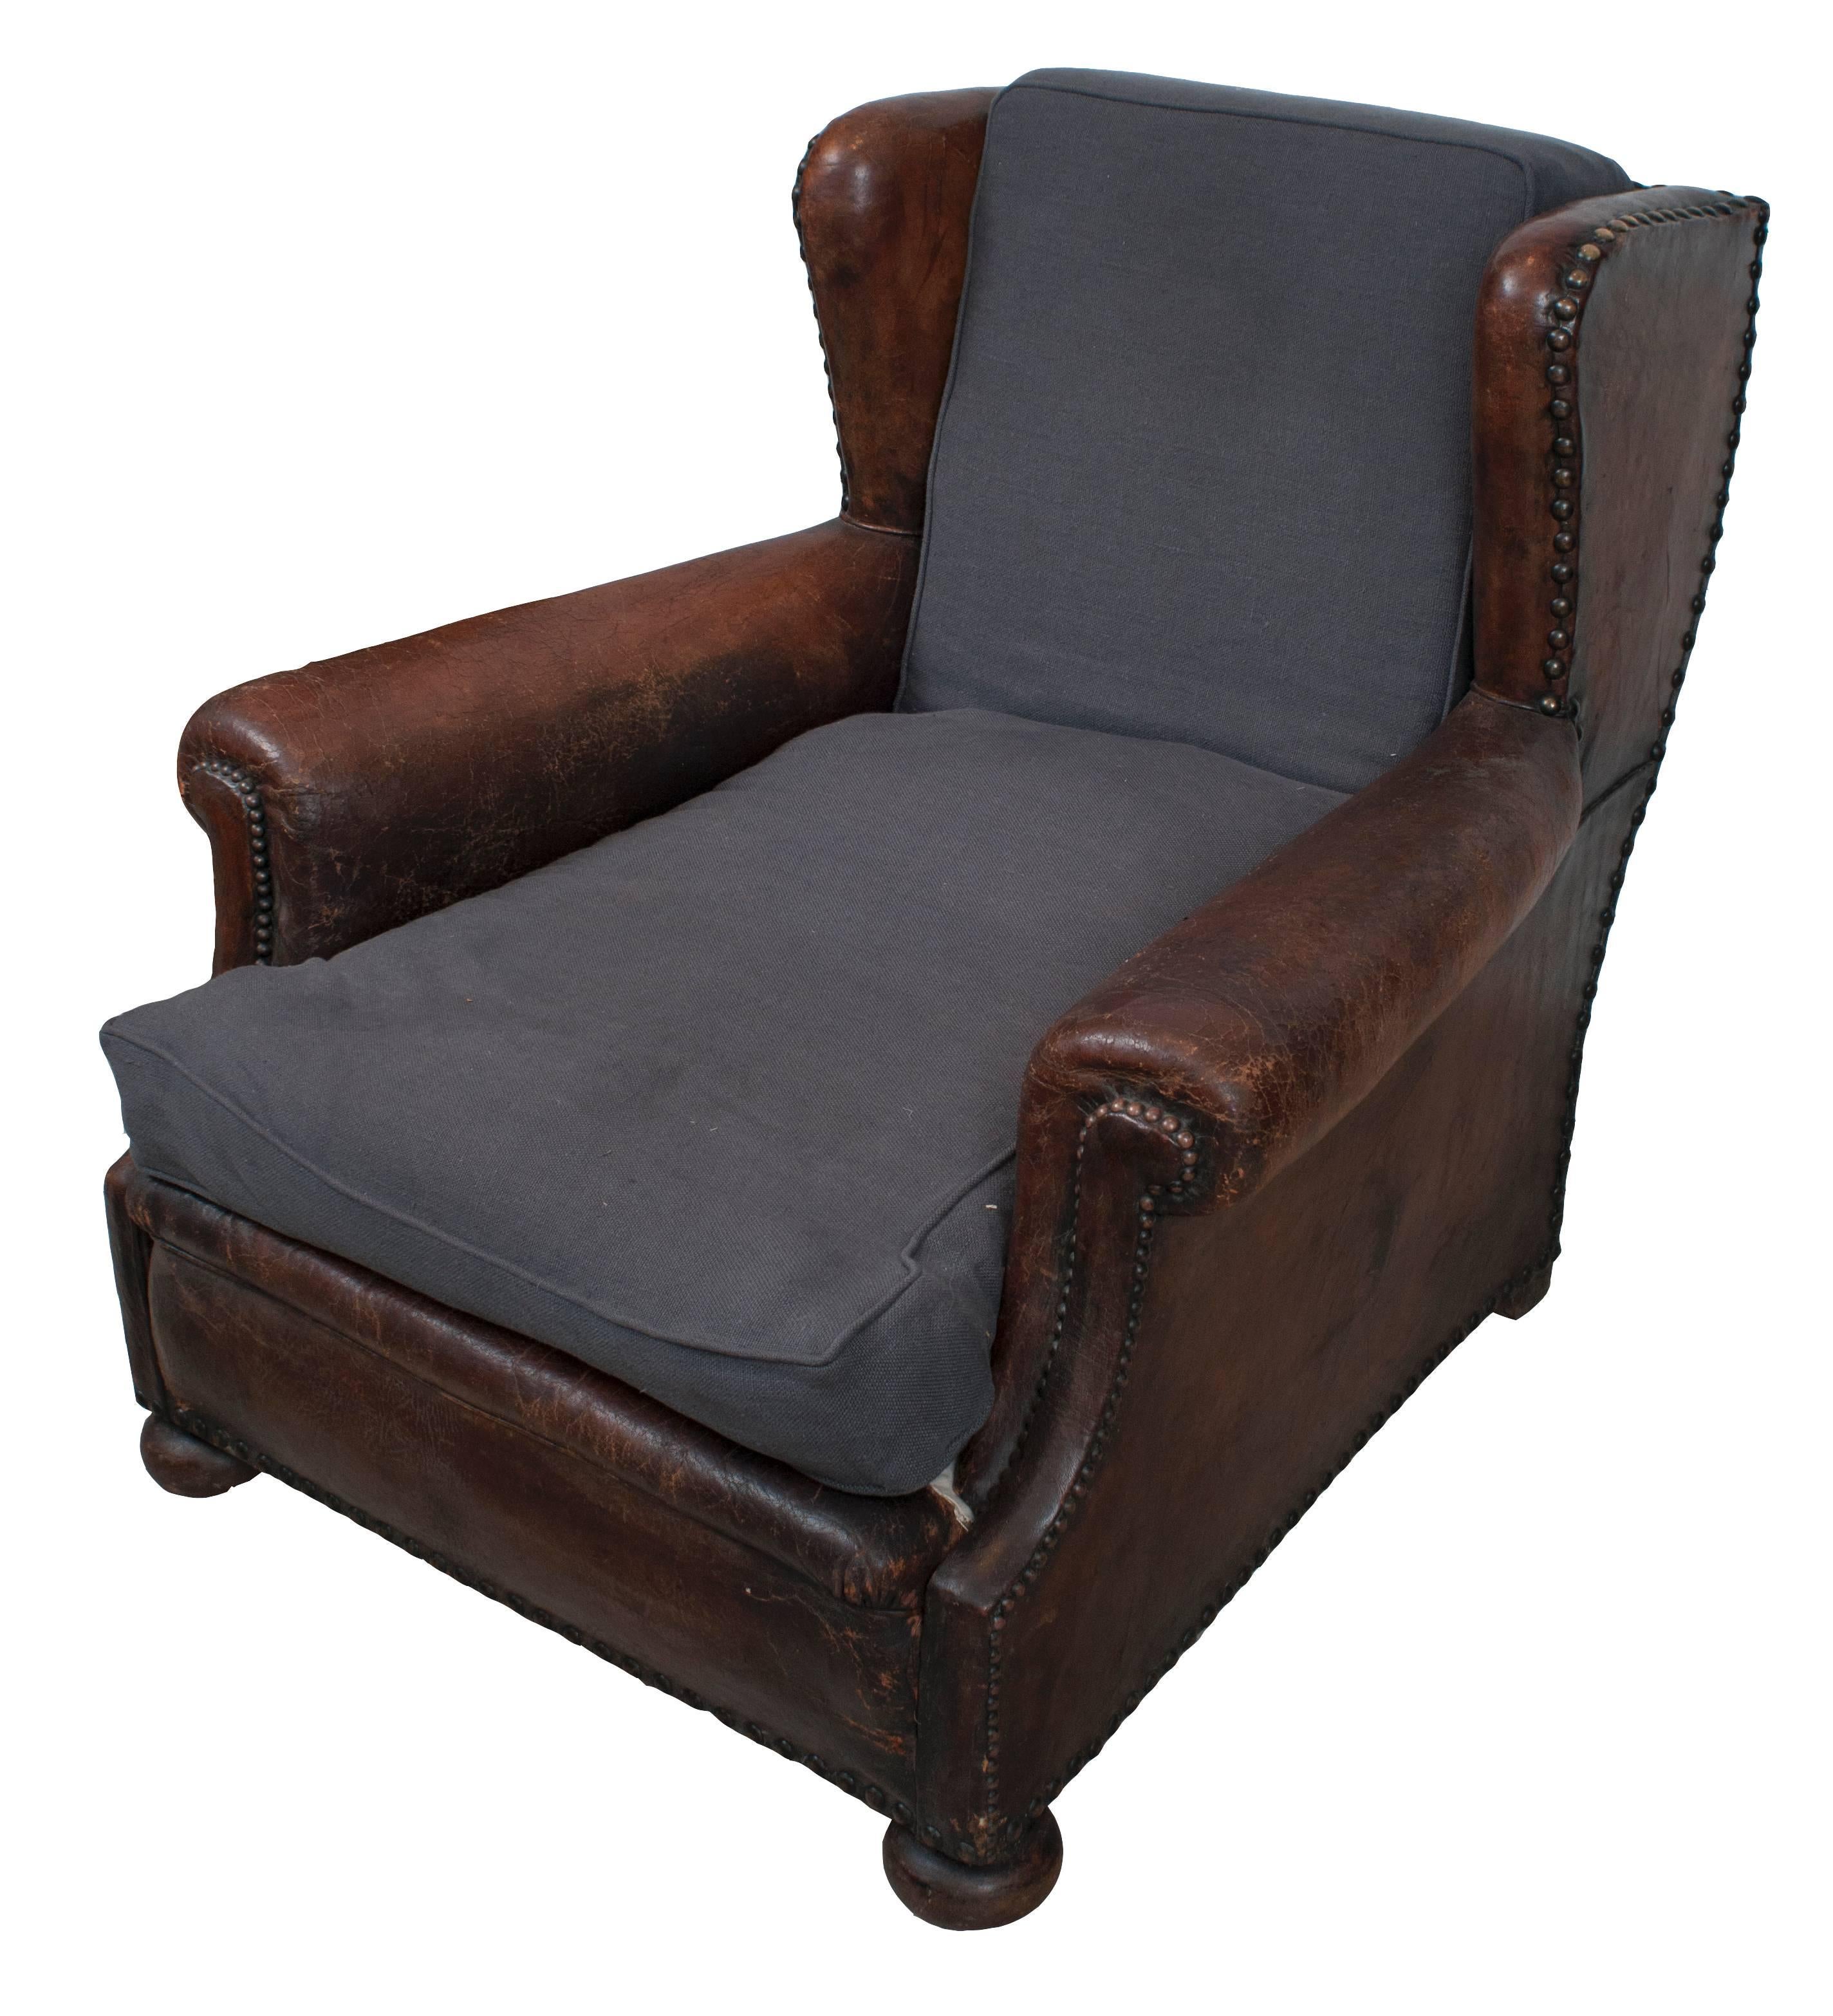 A pair of brown leather and blue linen seat and back cushions club chairs.